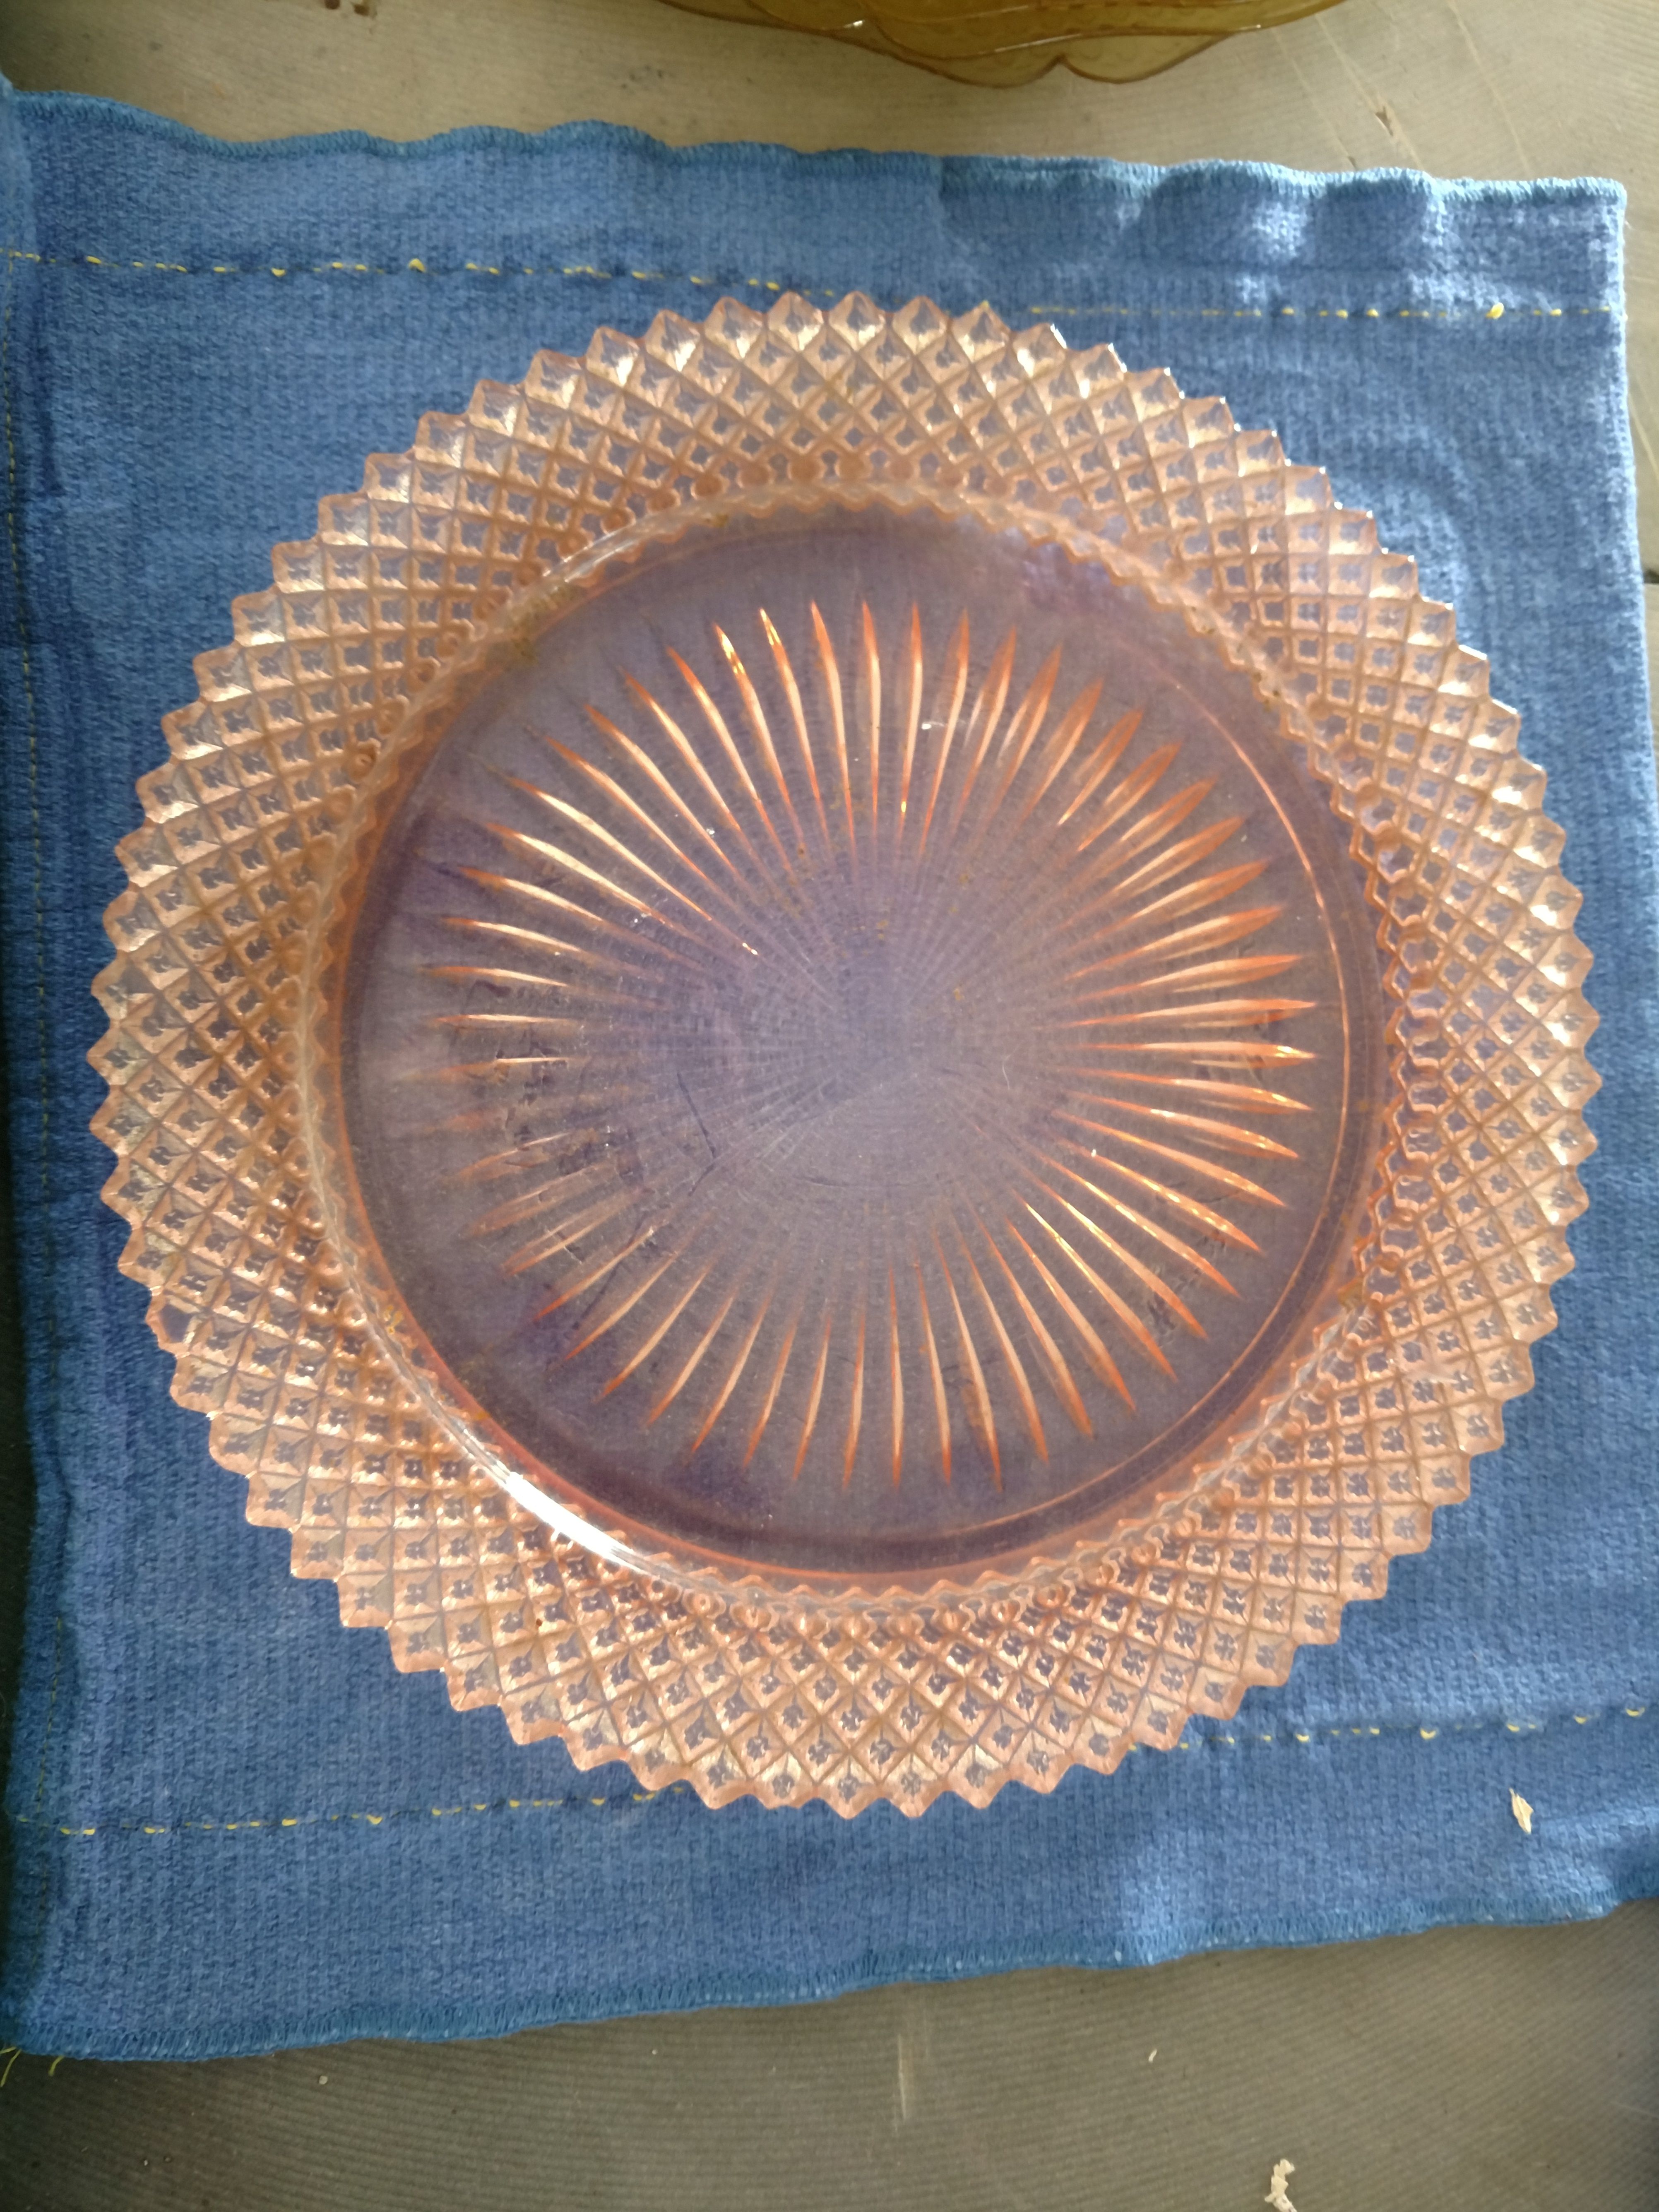 Pink Depression Glass Dishes(half price listing of the item below)